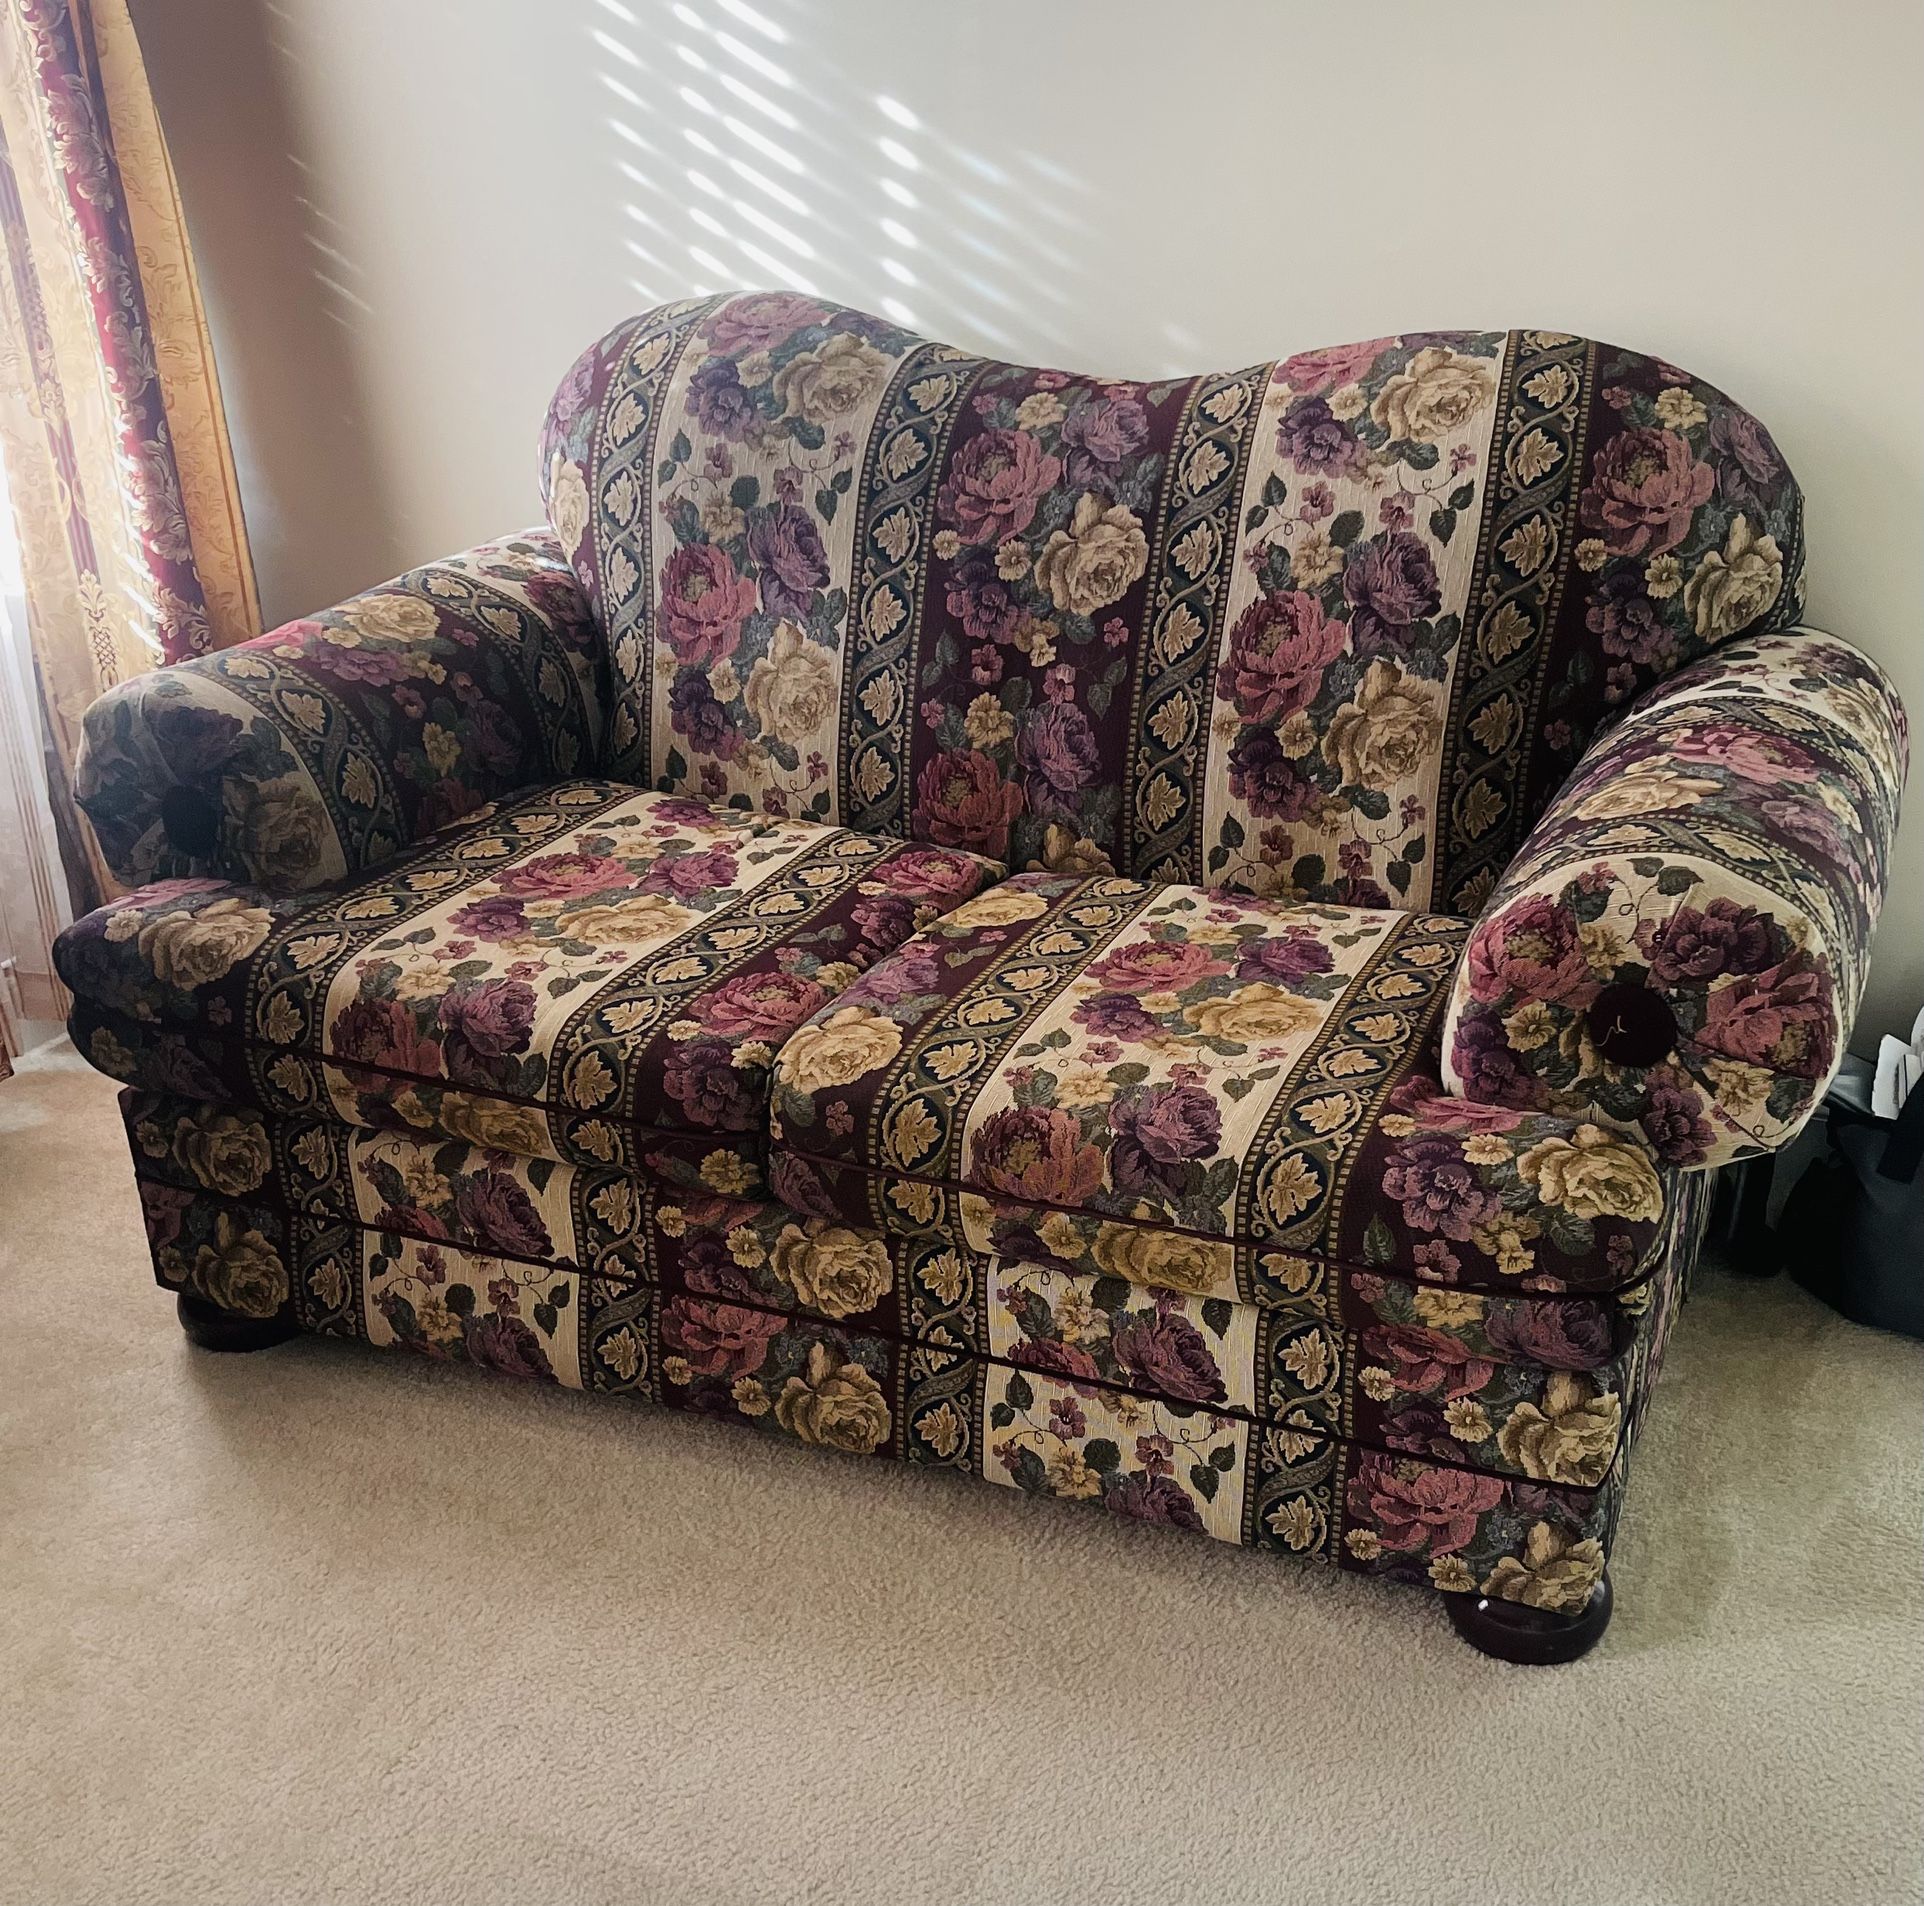 Loveseat And Matching Chair